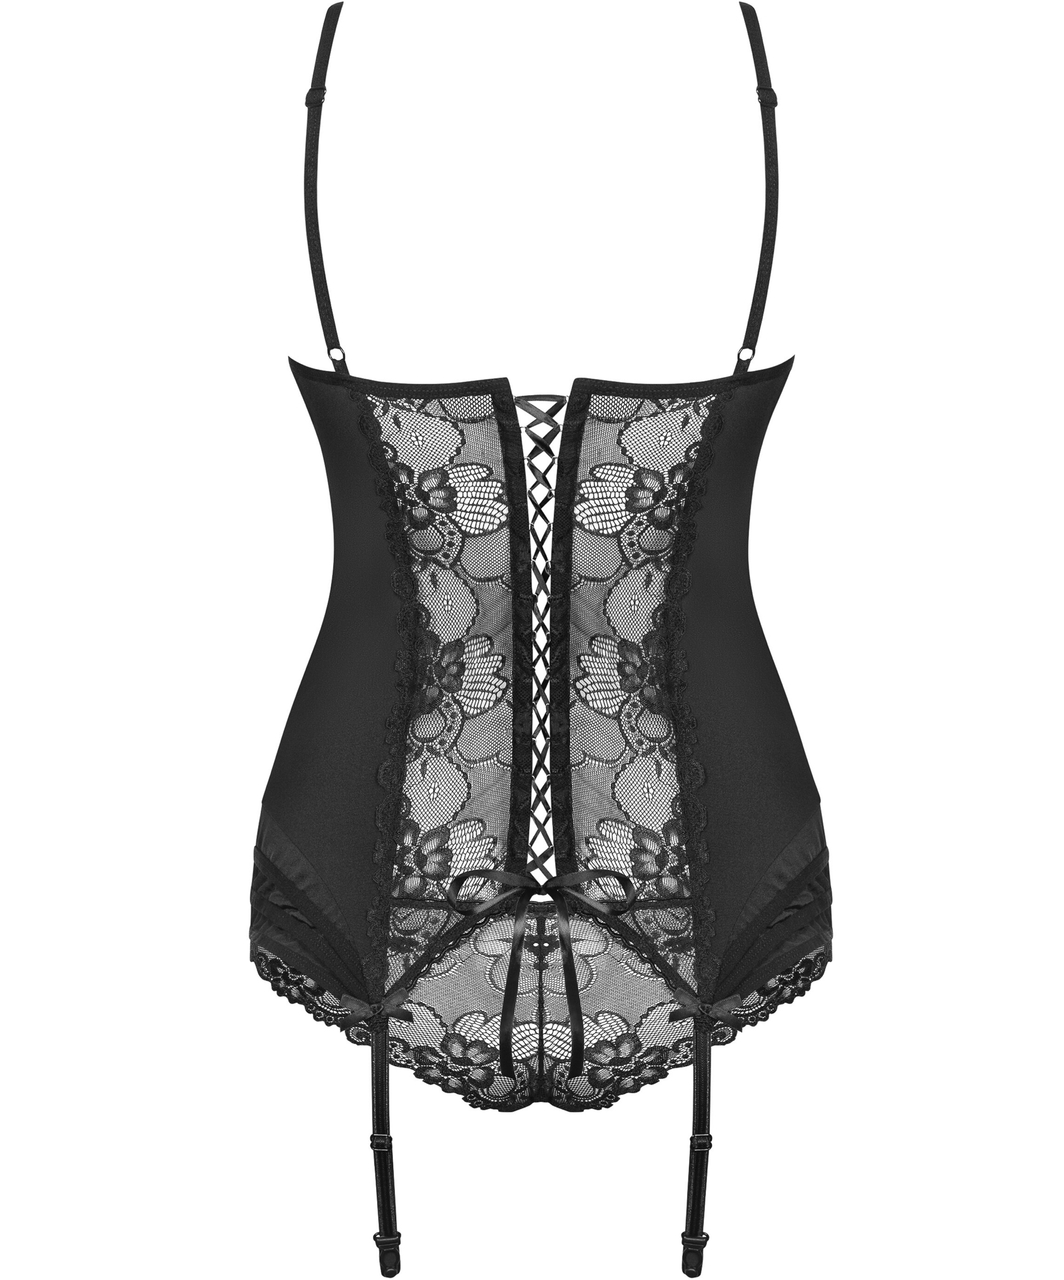 Obsessive black lace basque with panties